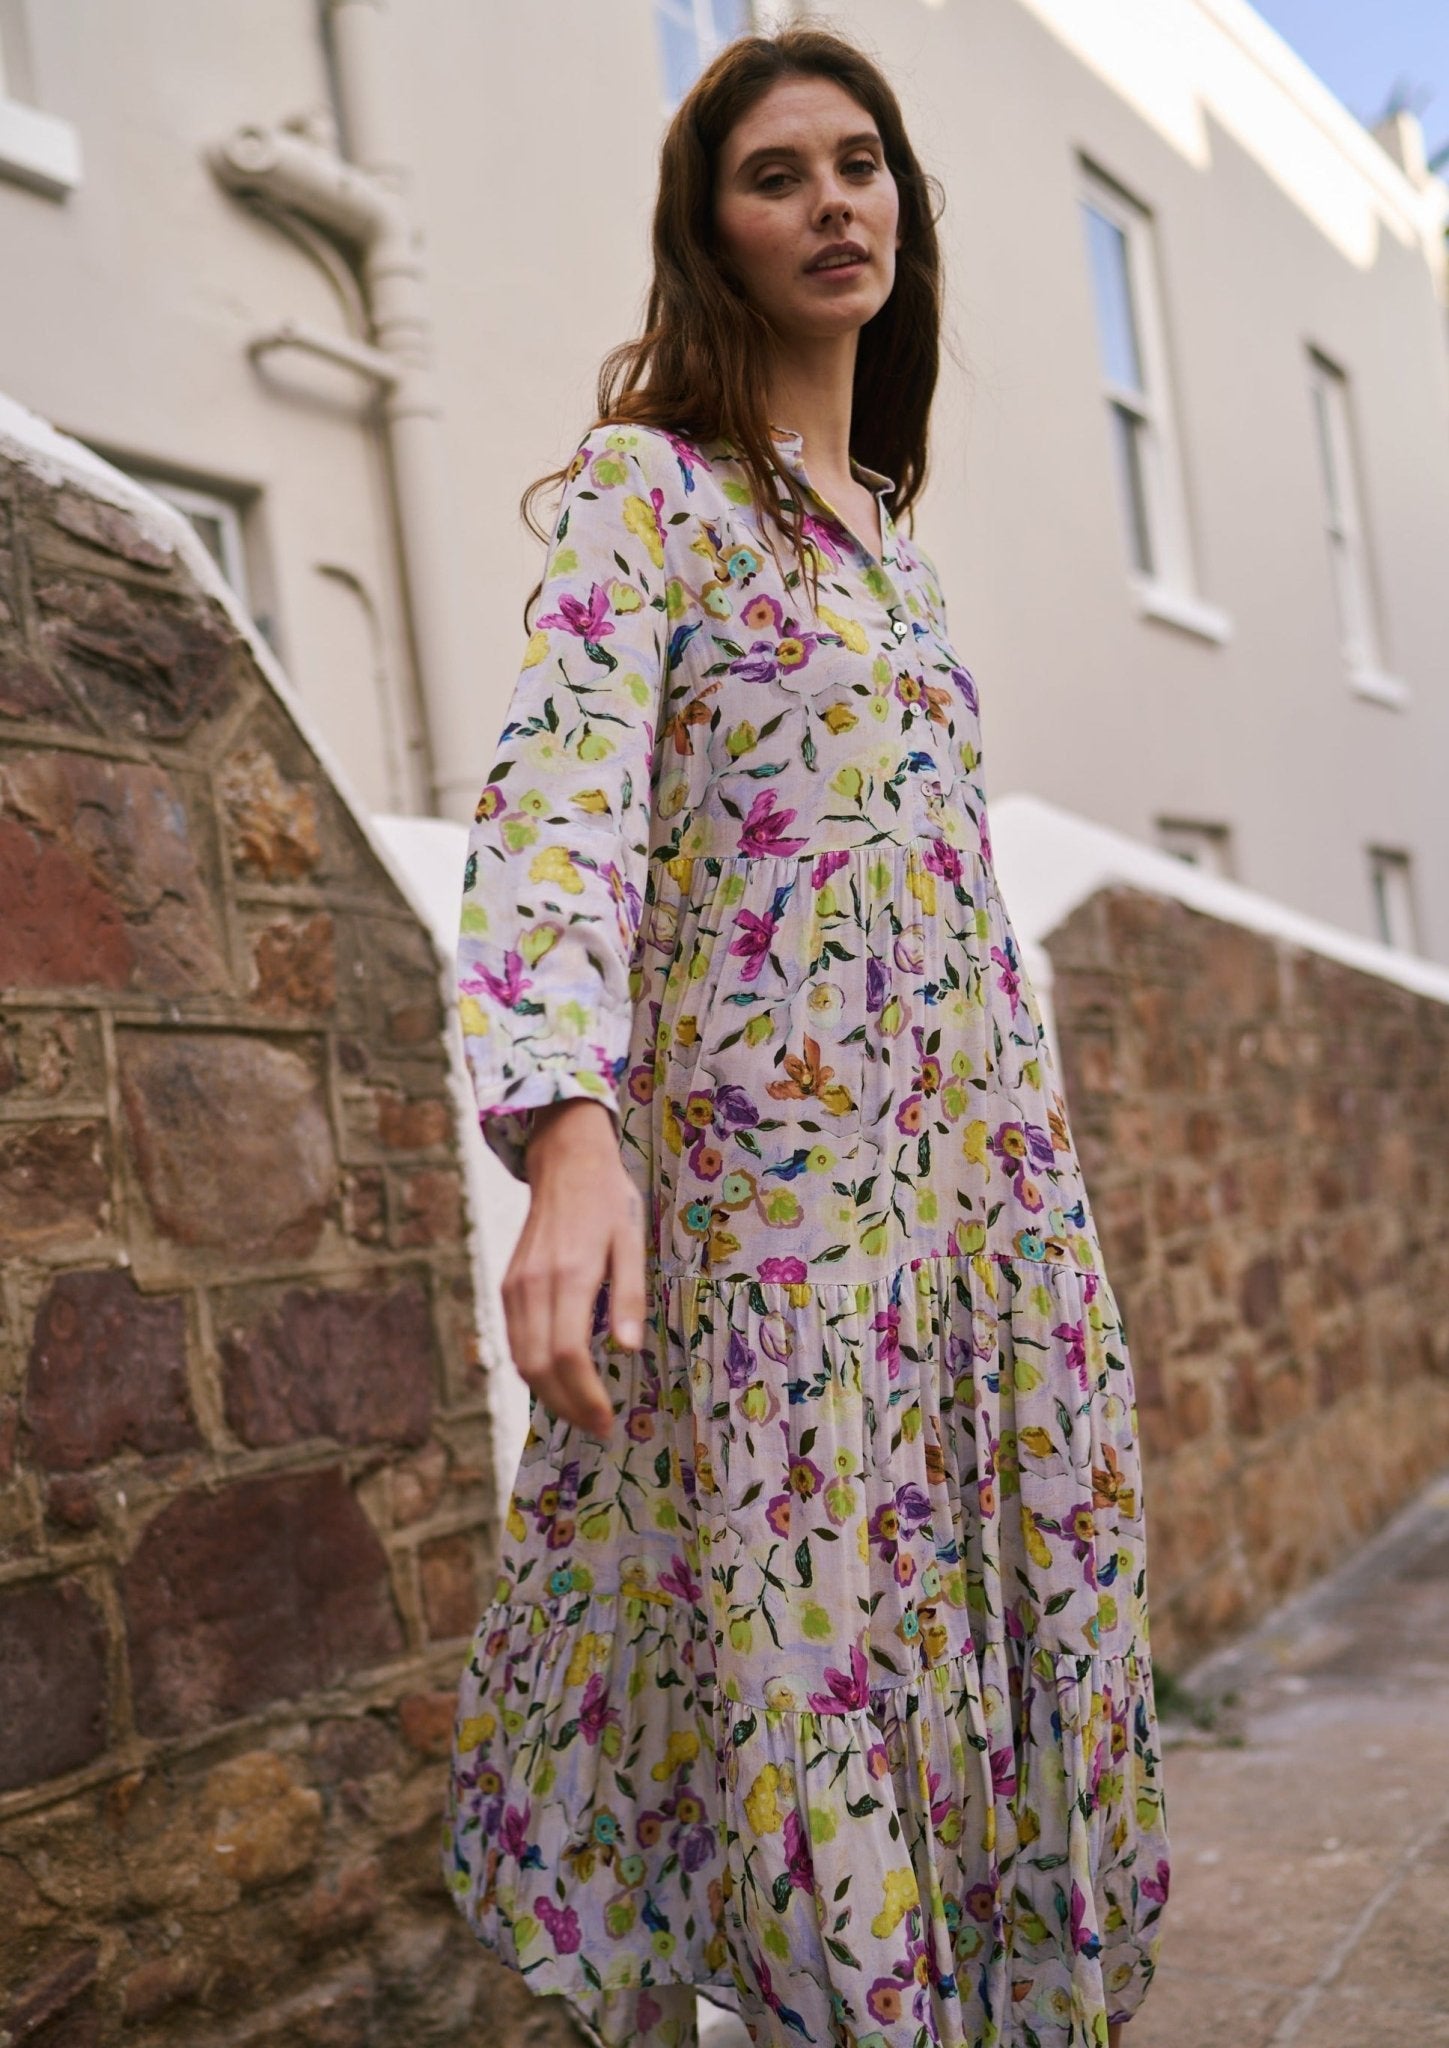 Bohemian Shirt Dress with Yellow and Lilac Floral Print - DRESSES ...